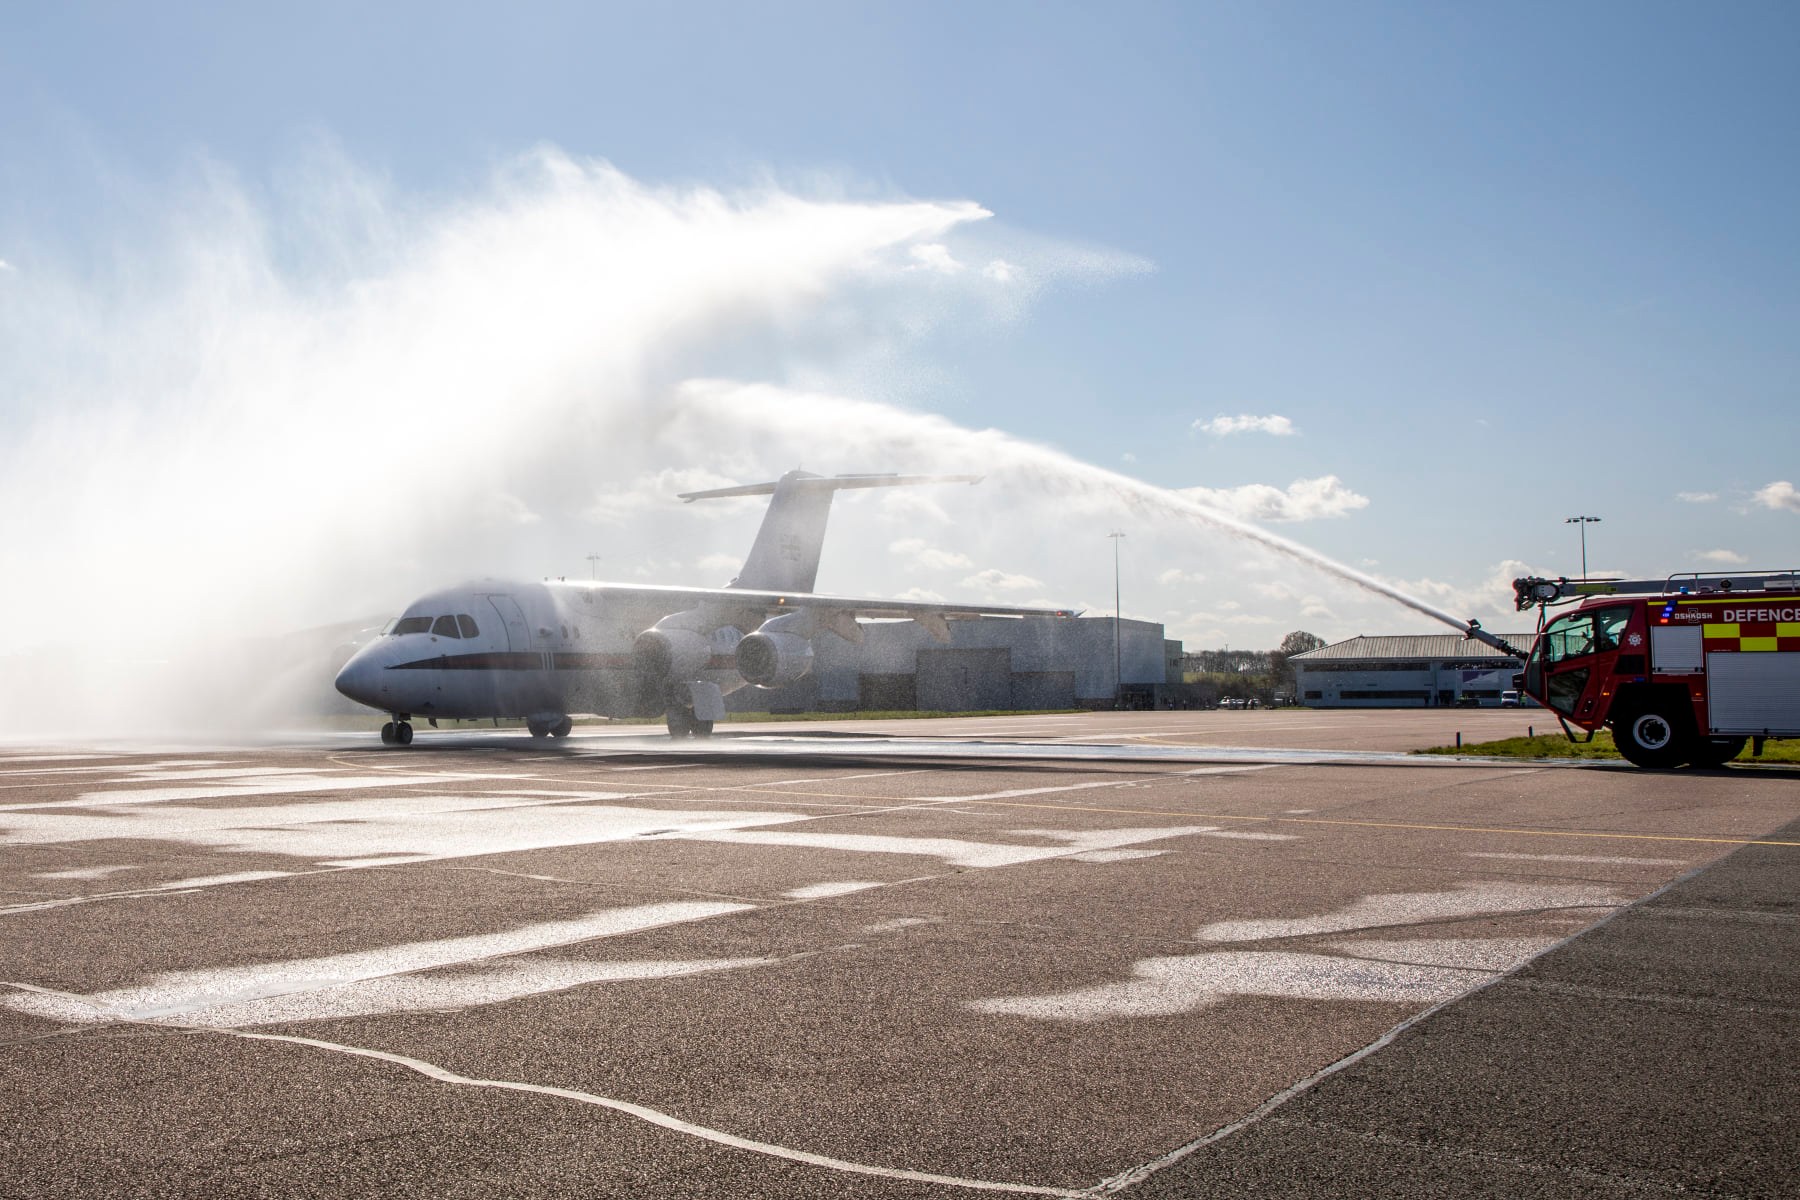 BAe146 aircraft being sprayed with water by fire engine.